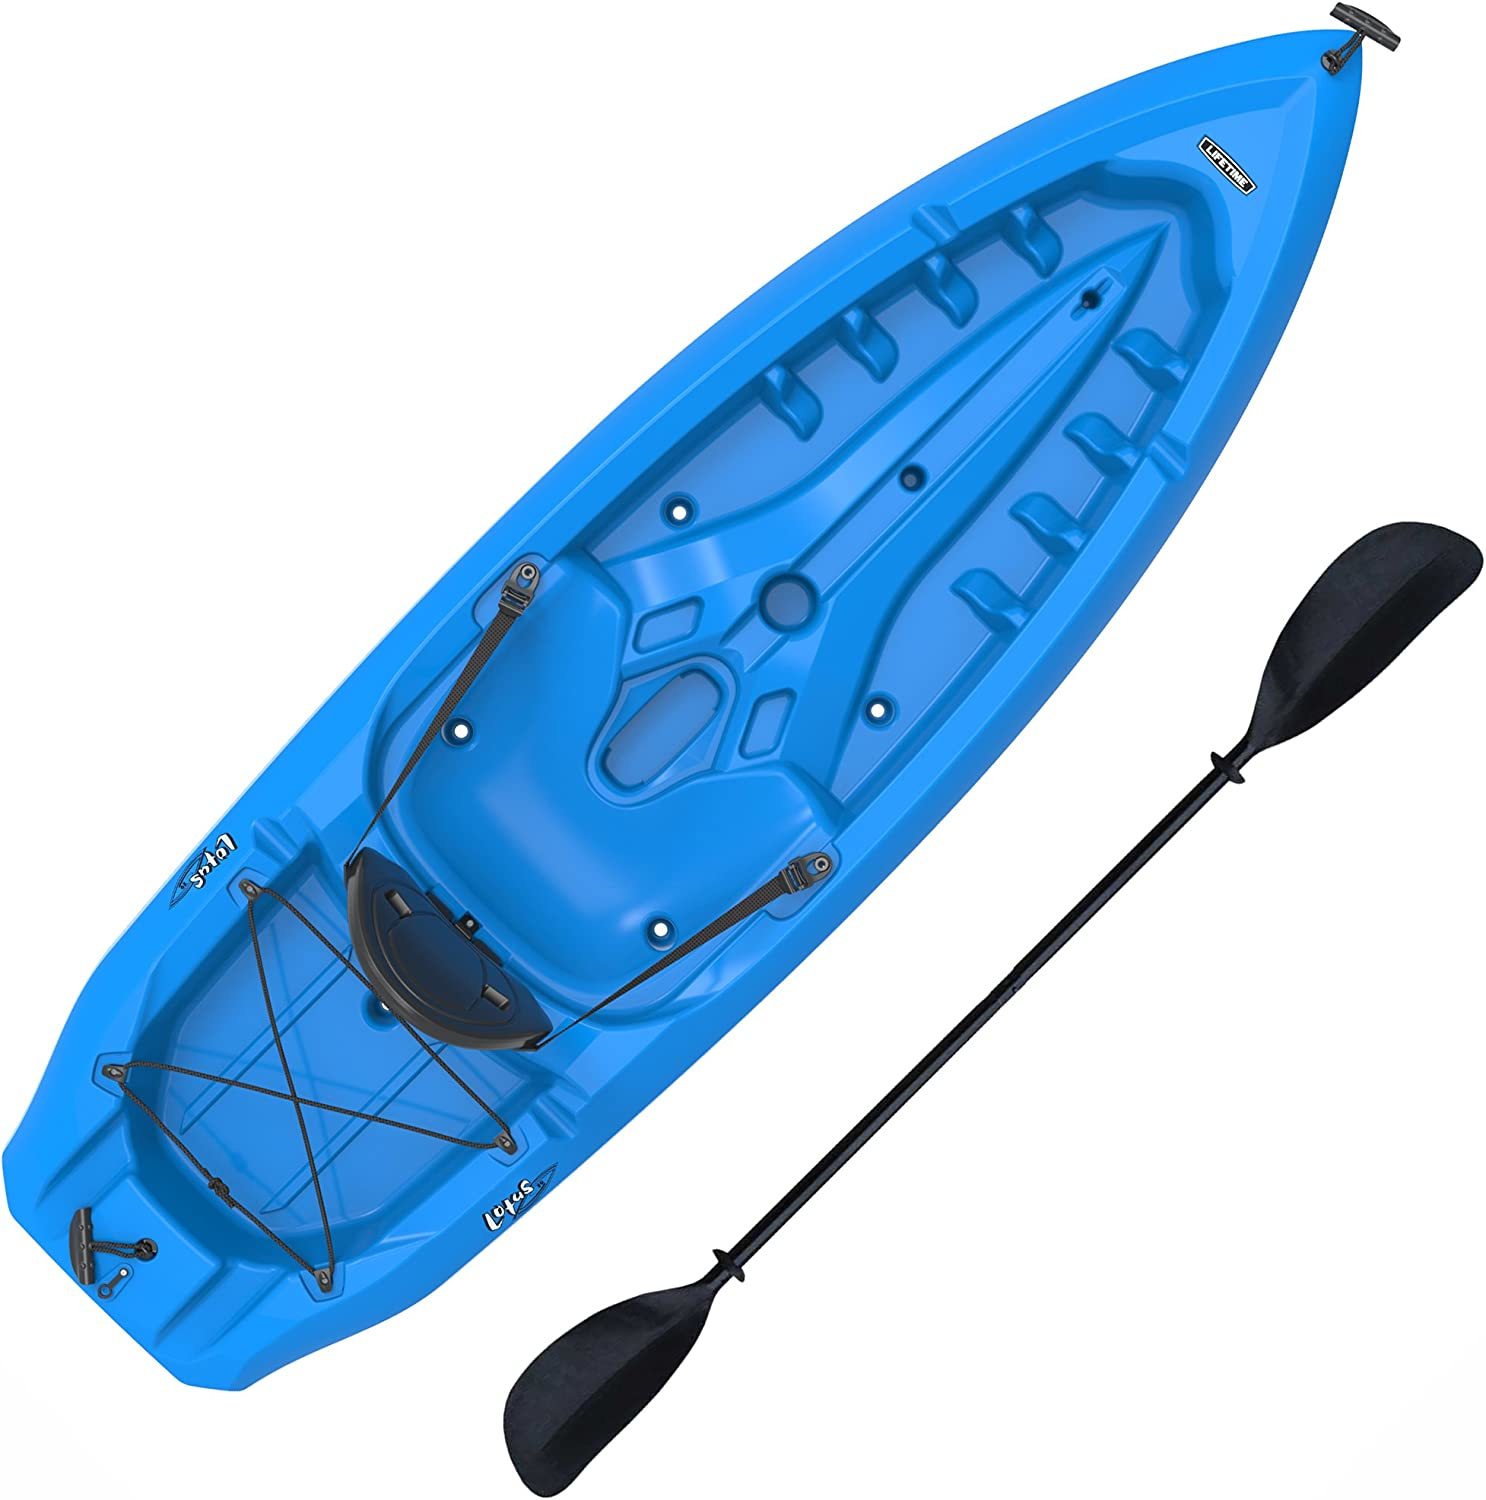 Kayak With Paddle From Lifetime Lotus. - $381.95